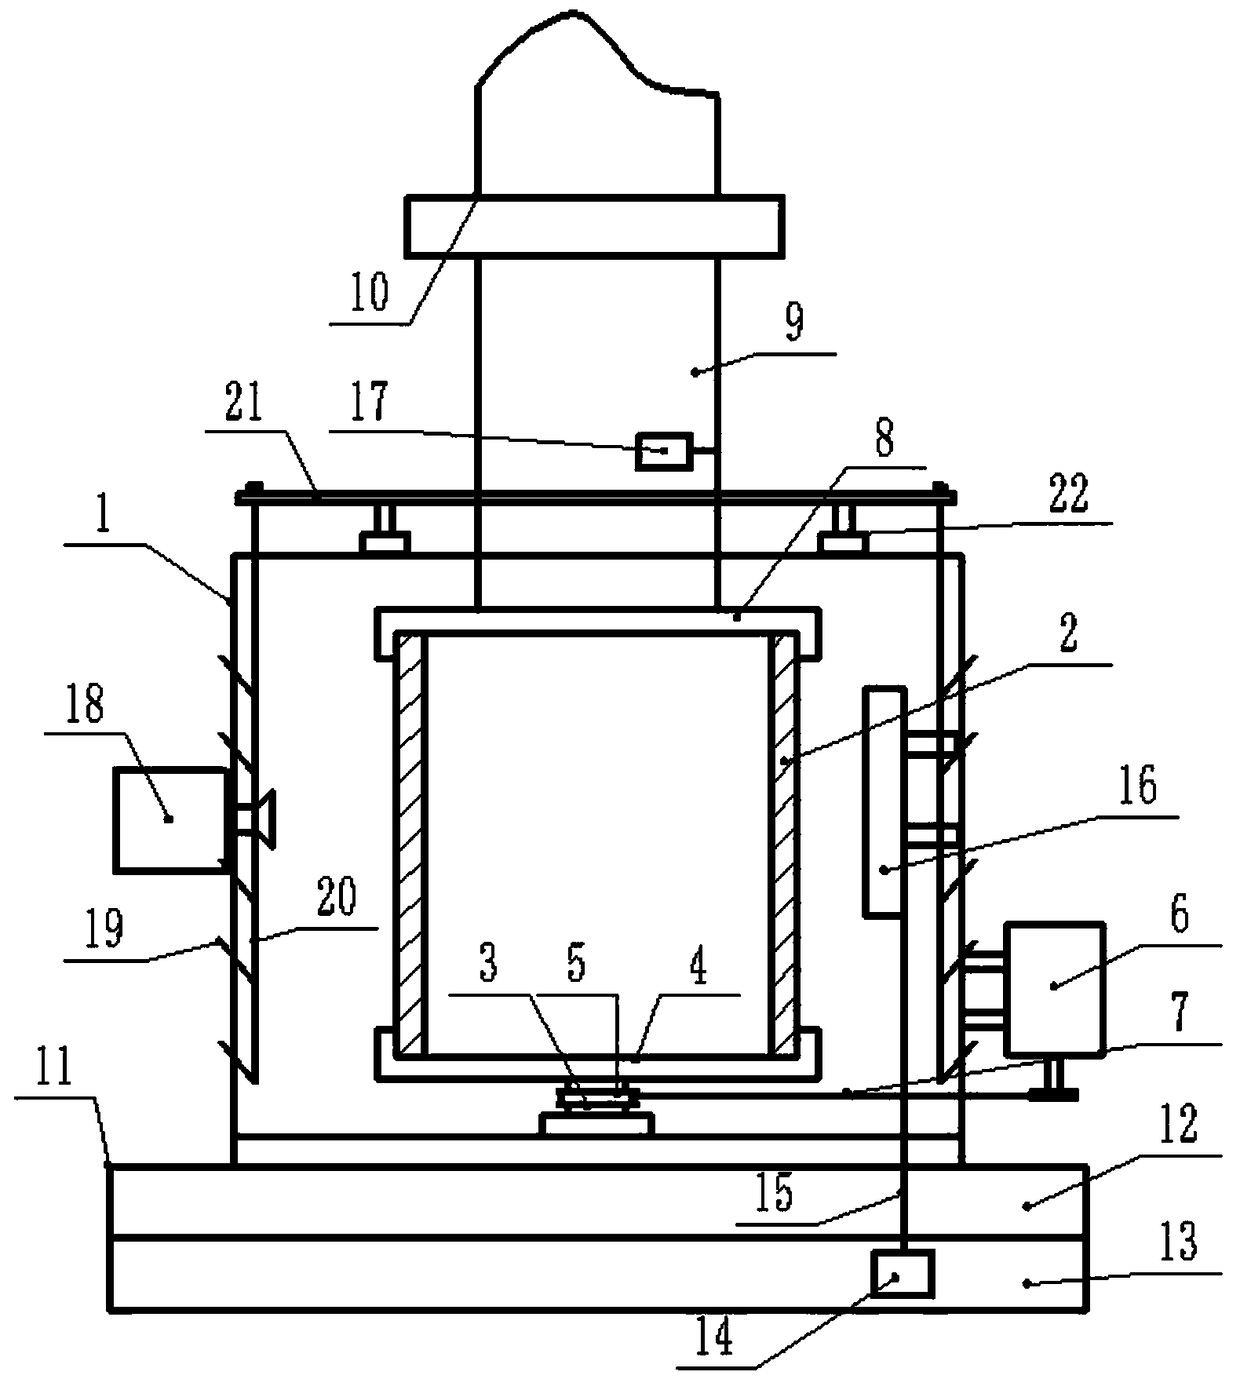 Control system of air filter with water-treating function